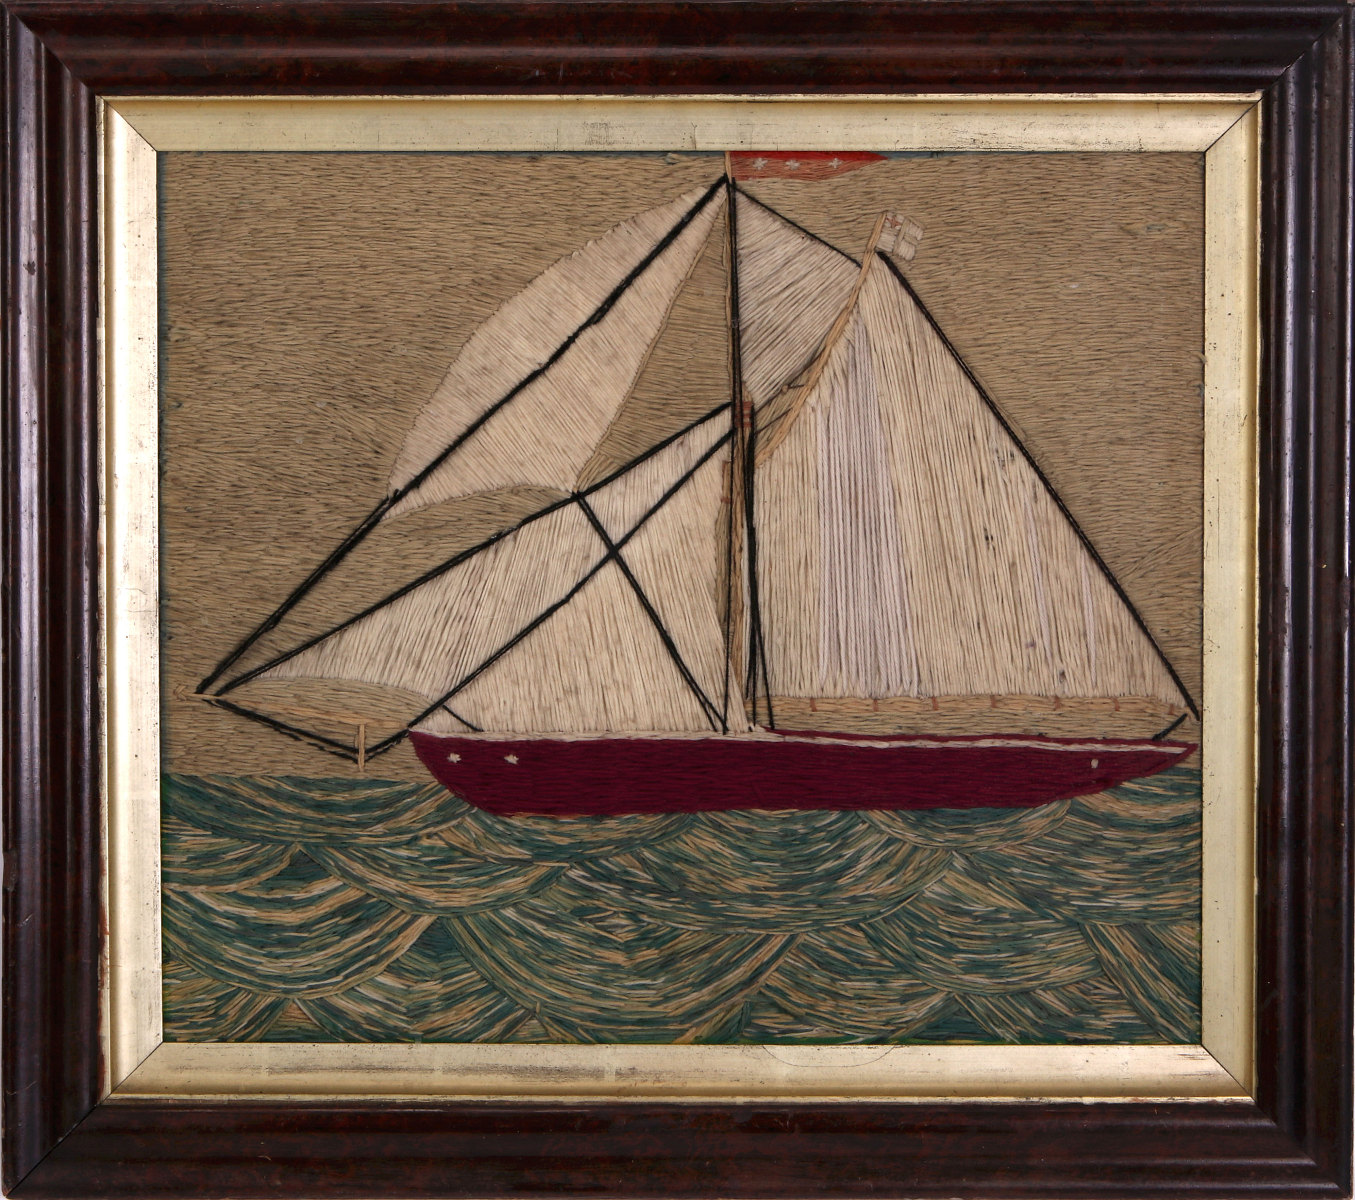 A 19TH C. SAILOR'S 'WOOLY' WOOL WORK SHIP PICTURE